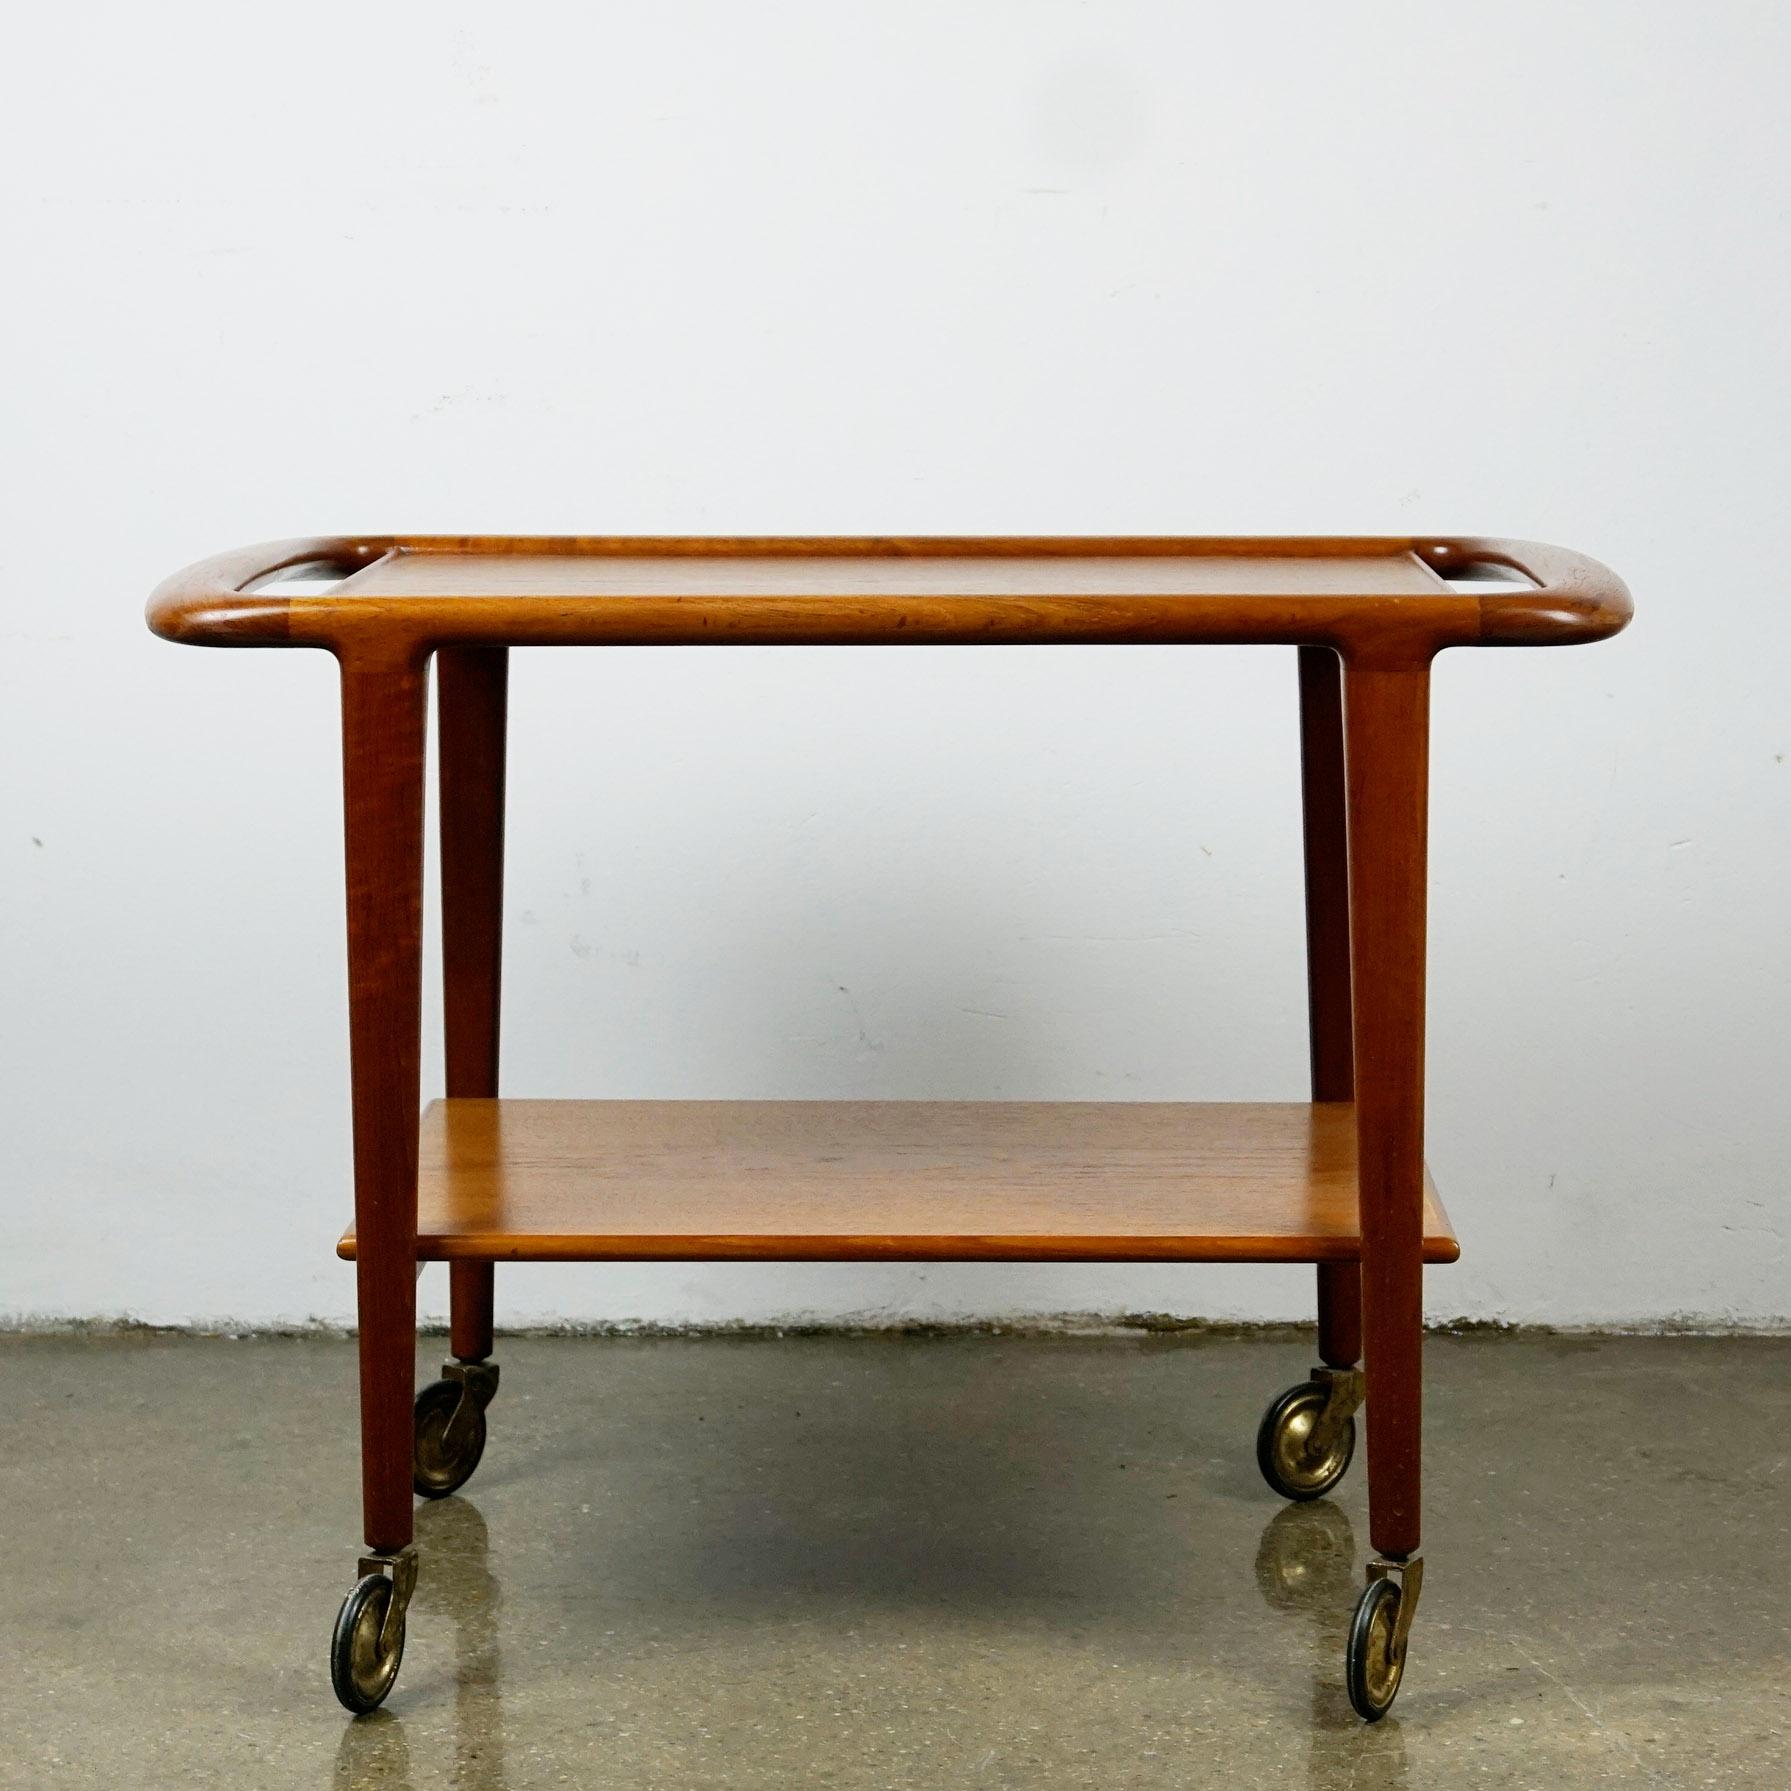 This charming Scandinavian Modern teak serving table or bar cart has been designed by Niels Otto Møller, Denmark 1960s and produced by J.L. Møllers Møbelfabrik. It has beautiful organic shaped handles, the original manufacturers label and the Danish